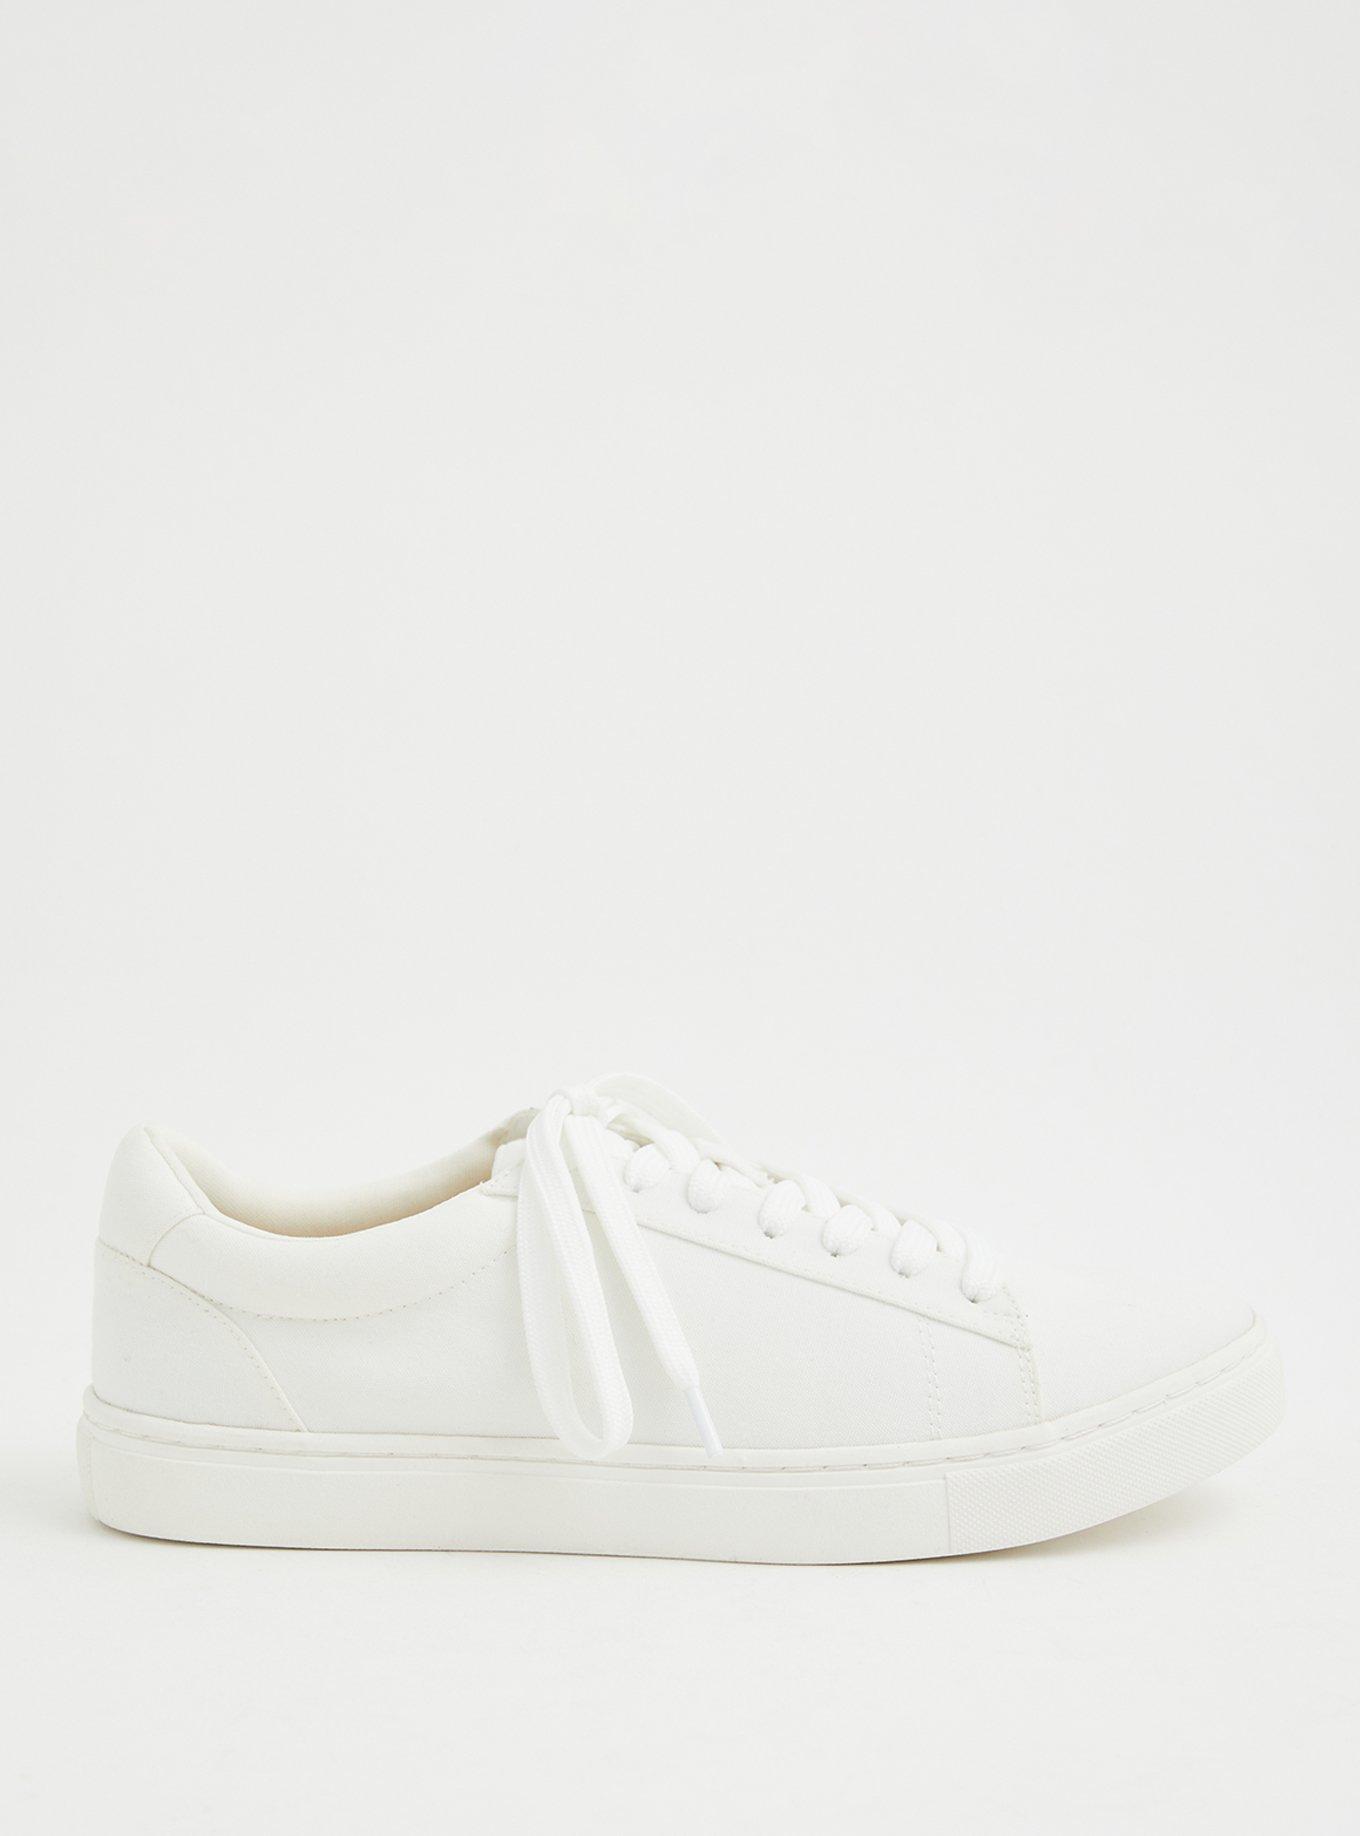 Plus Size - White Recycled Canvas Sneaker (WW) - Torrid